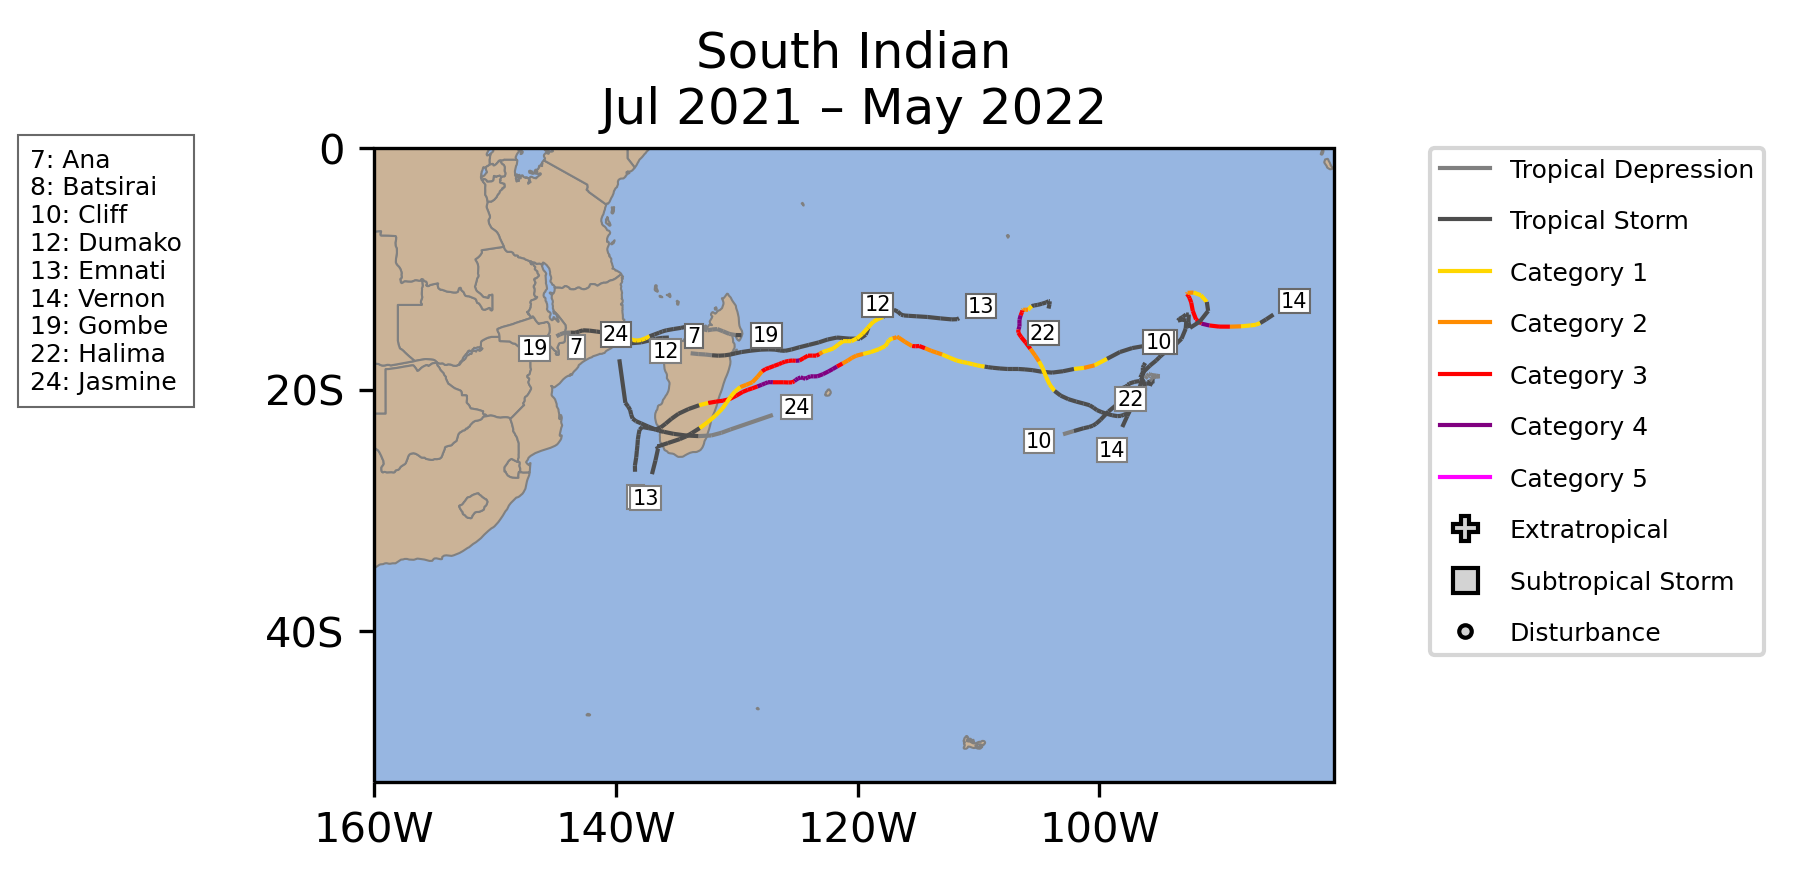 South Indian Tropical Cyclone Storm Tracks July 2021-May 2022